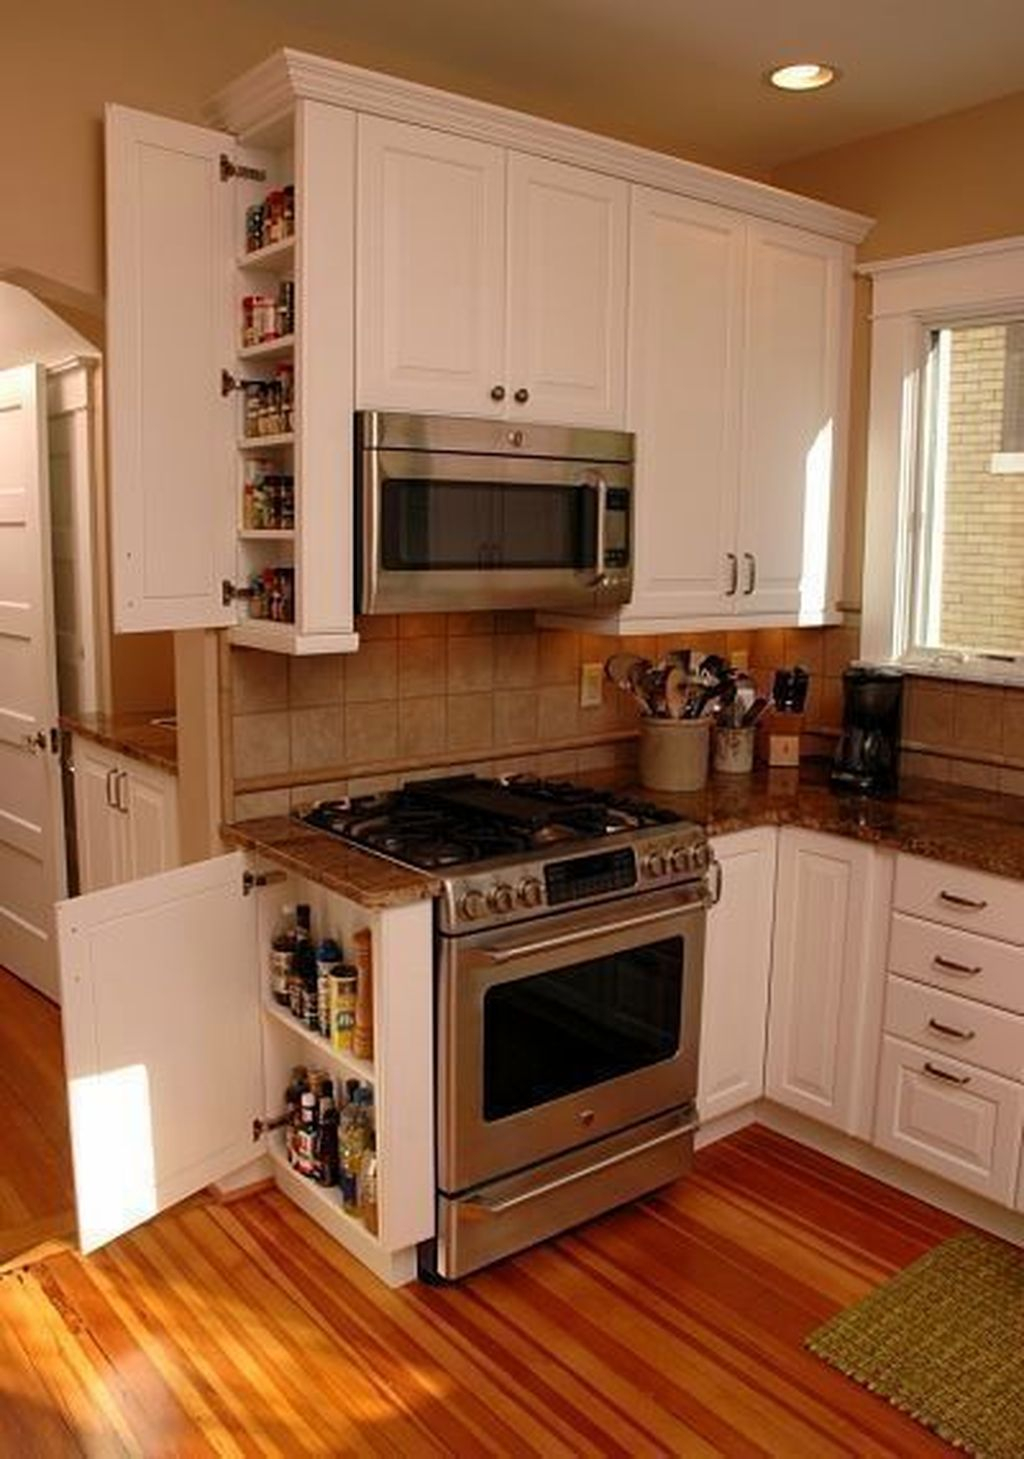 Best Small Kitchen Remodel Design Ideas That Low Cost And Easy To Copy 09